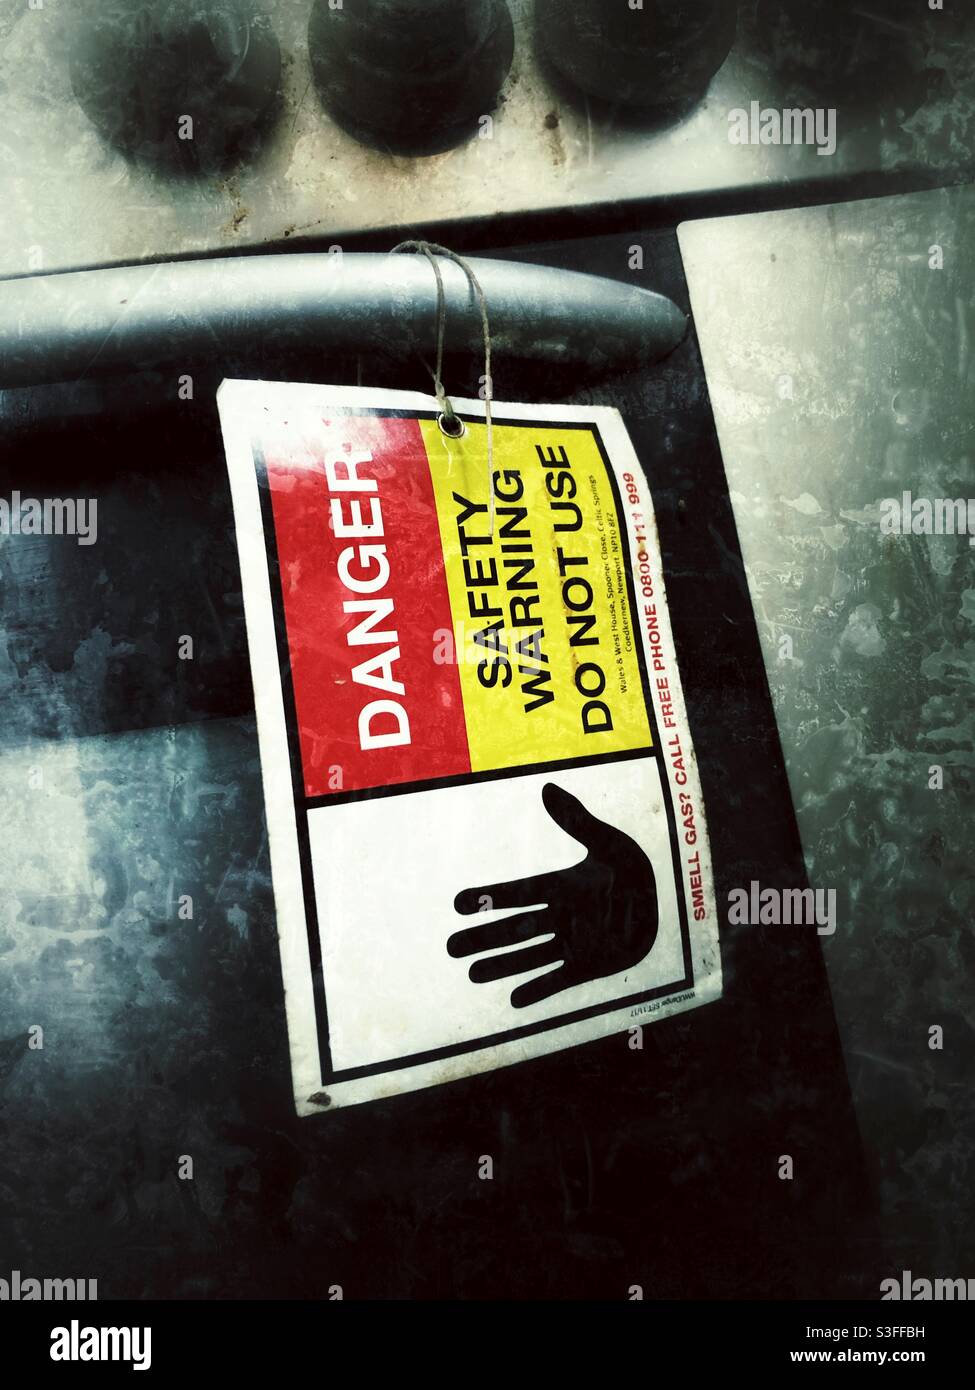 Danger safety warning sign on old gas appliance condemned as unsafe for use Stock Photo